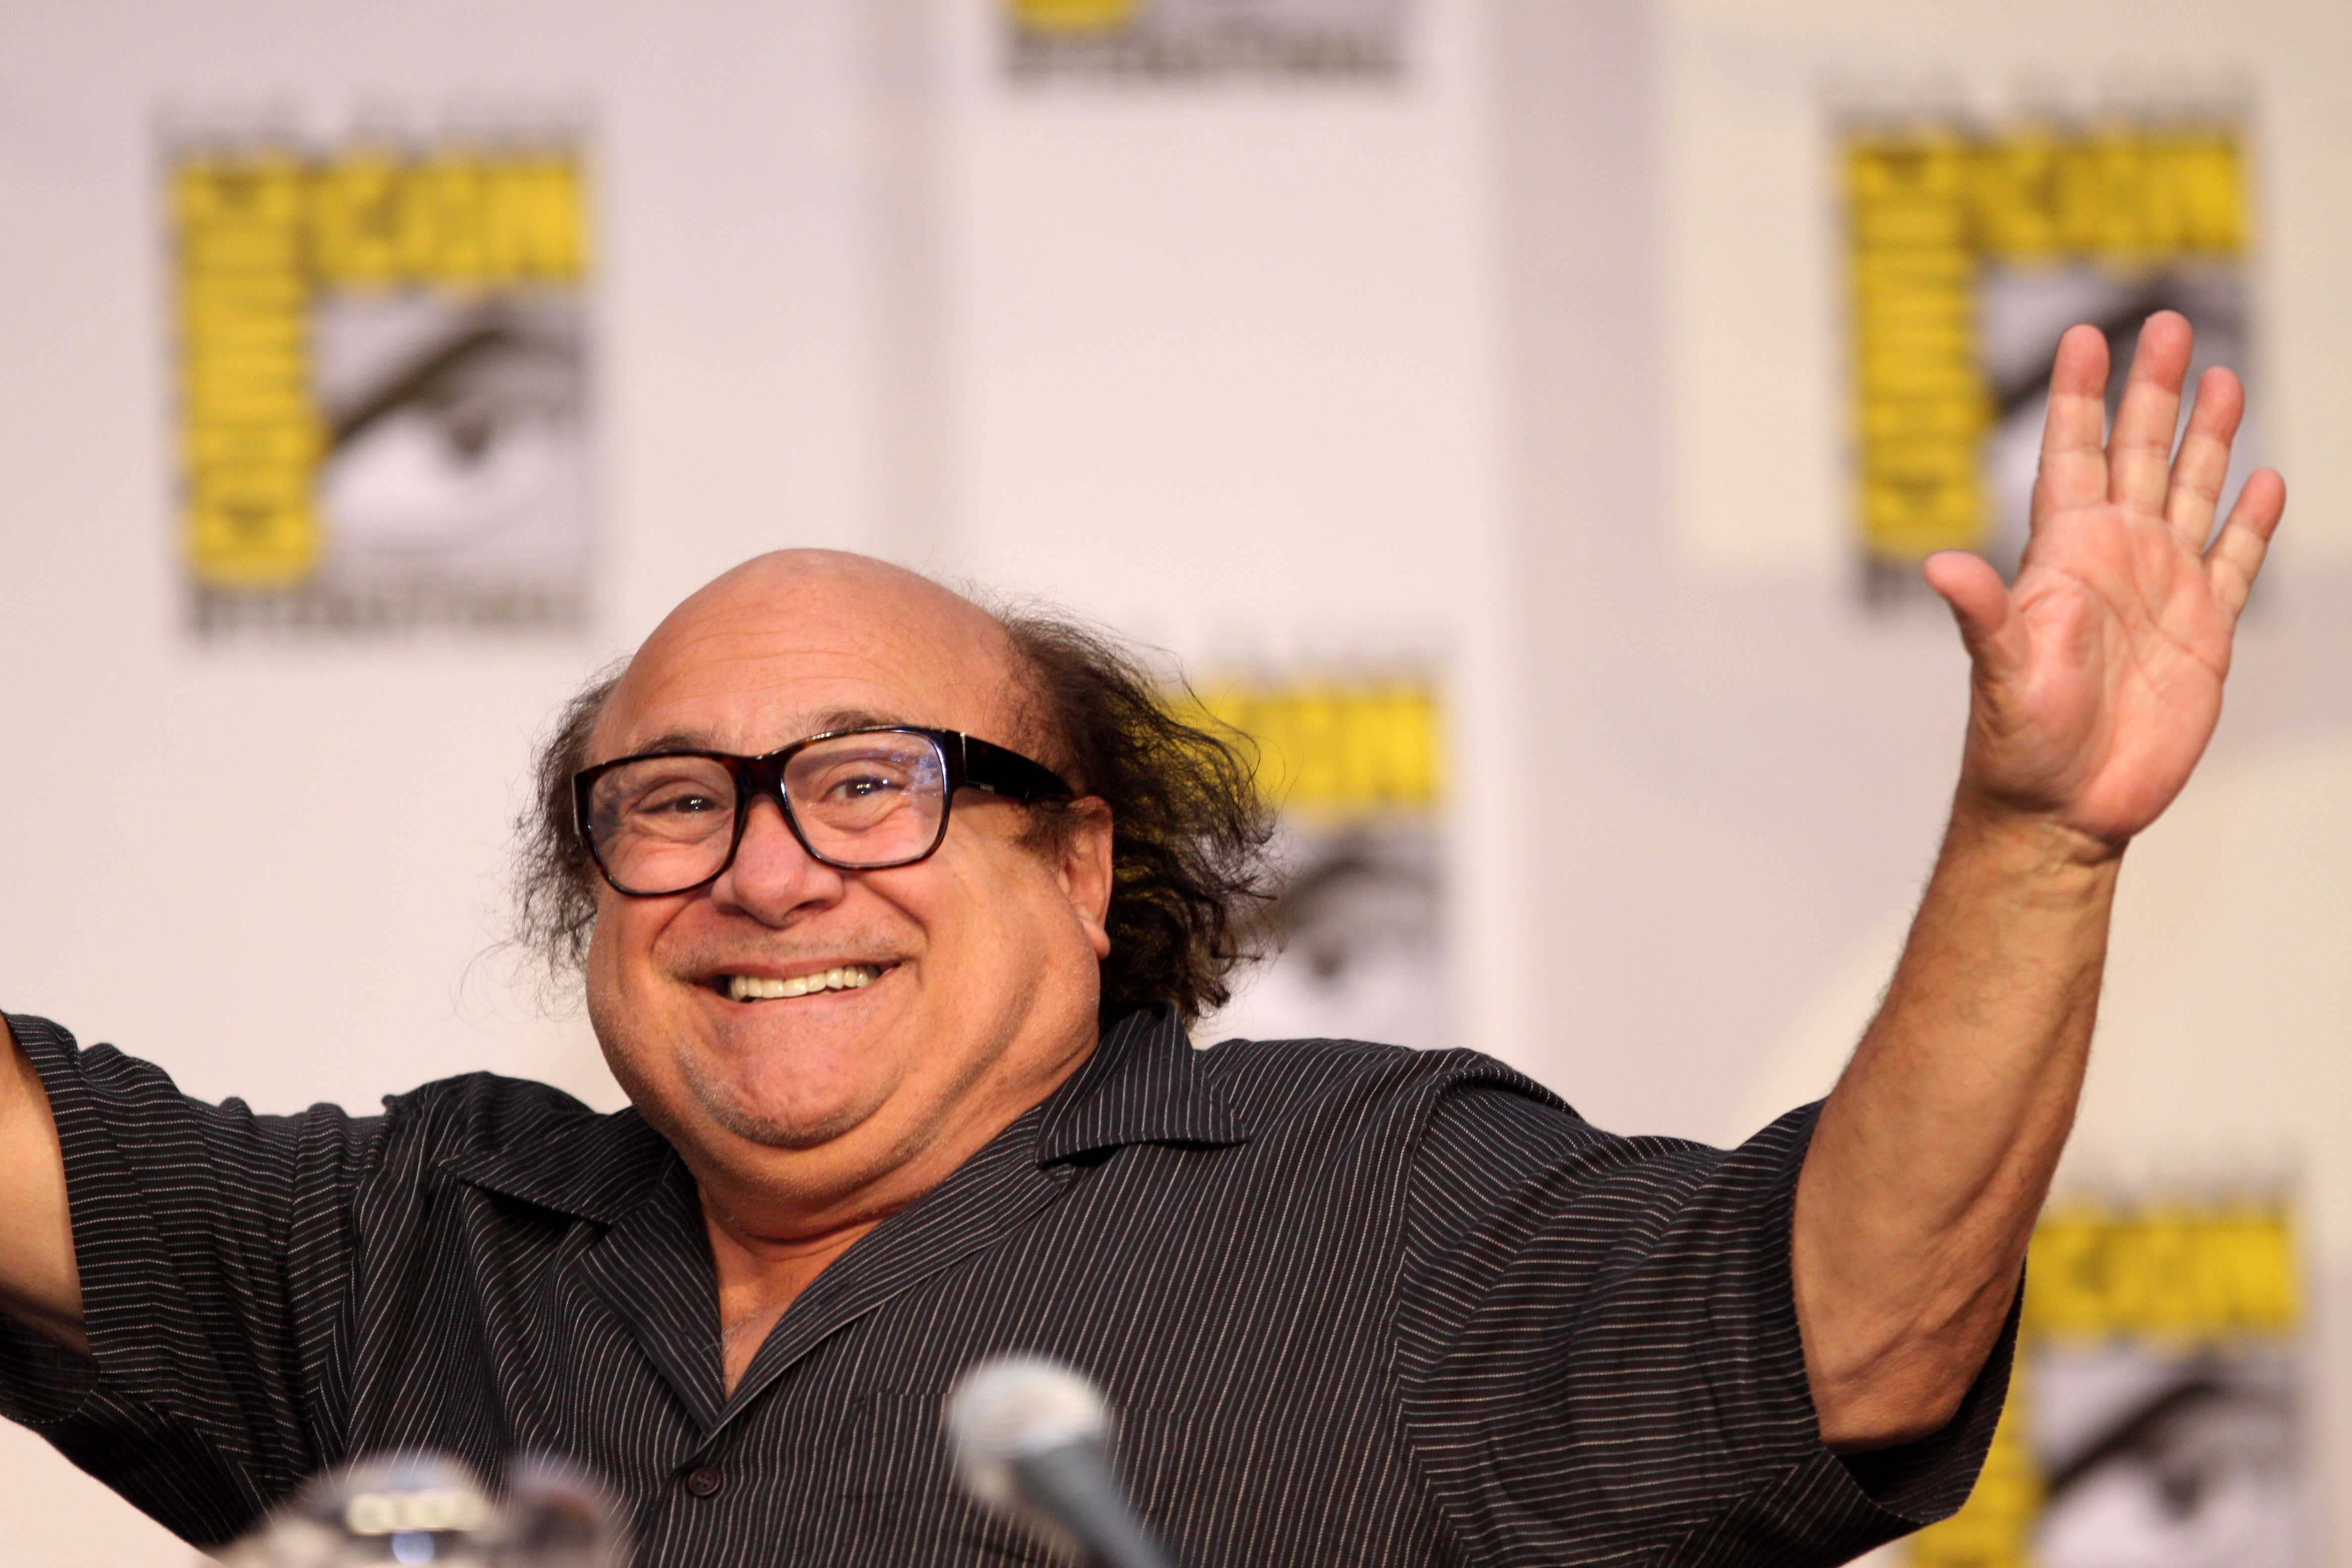 Danny Devito High Definition Wallpapers